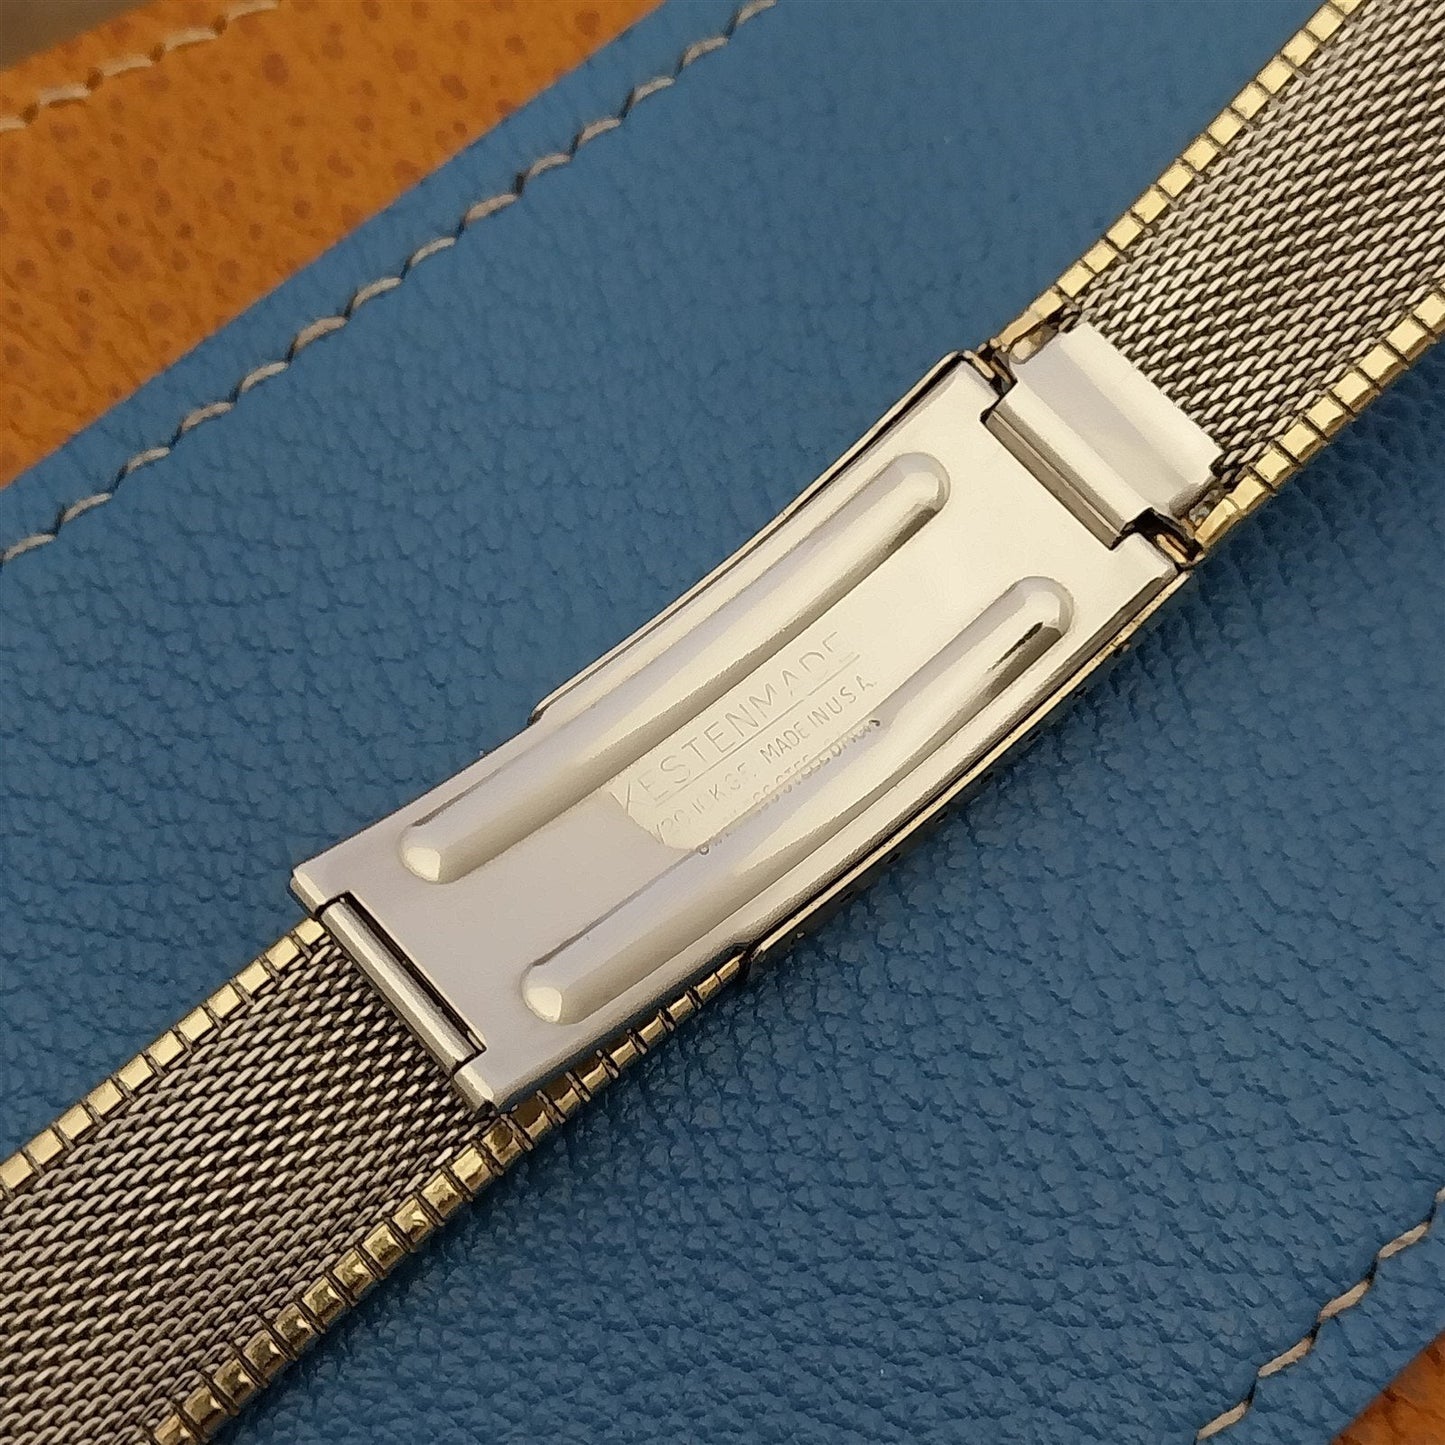 19mm 10k Gold-Filled 1960s Classic Kestenmade USA Vintage Watch Band